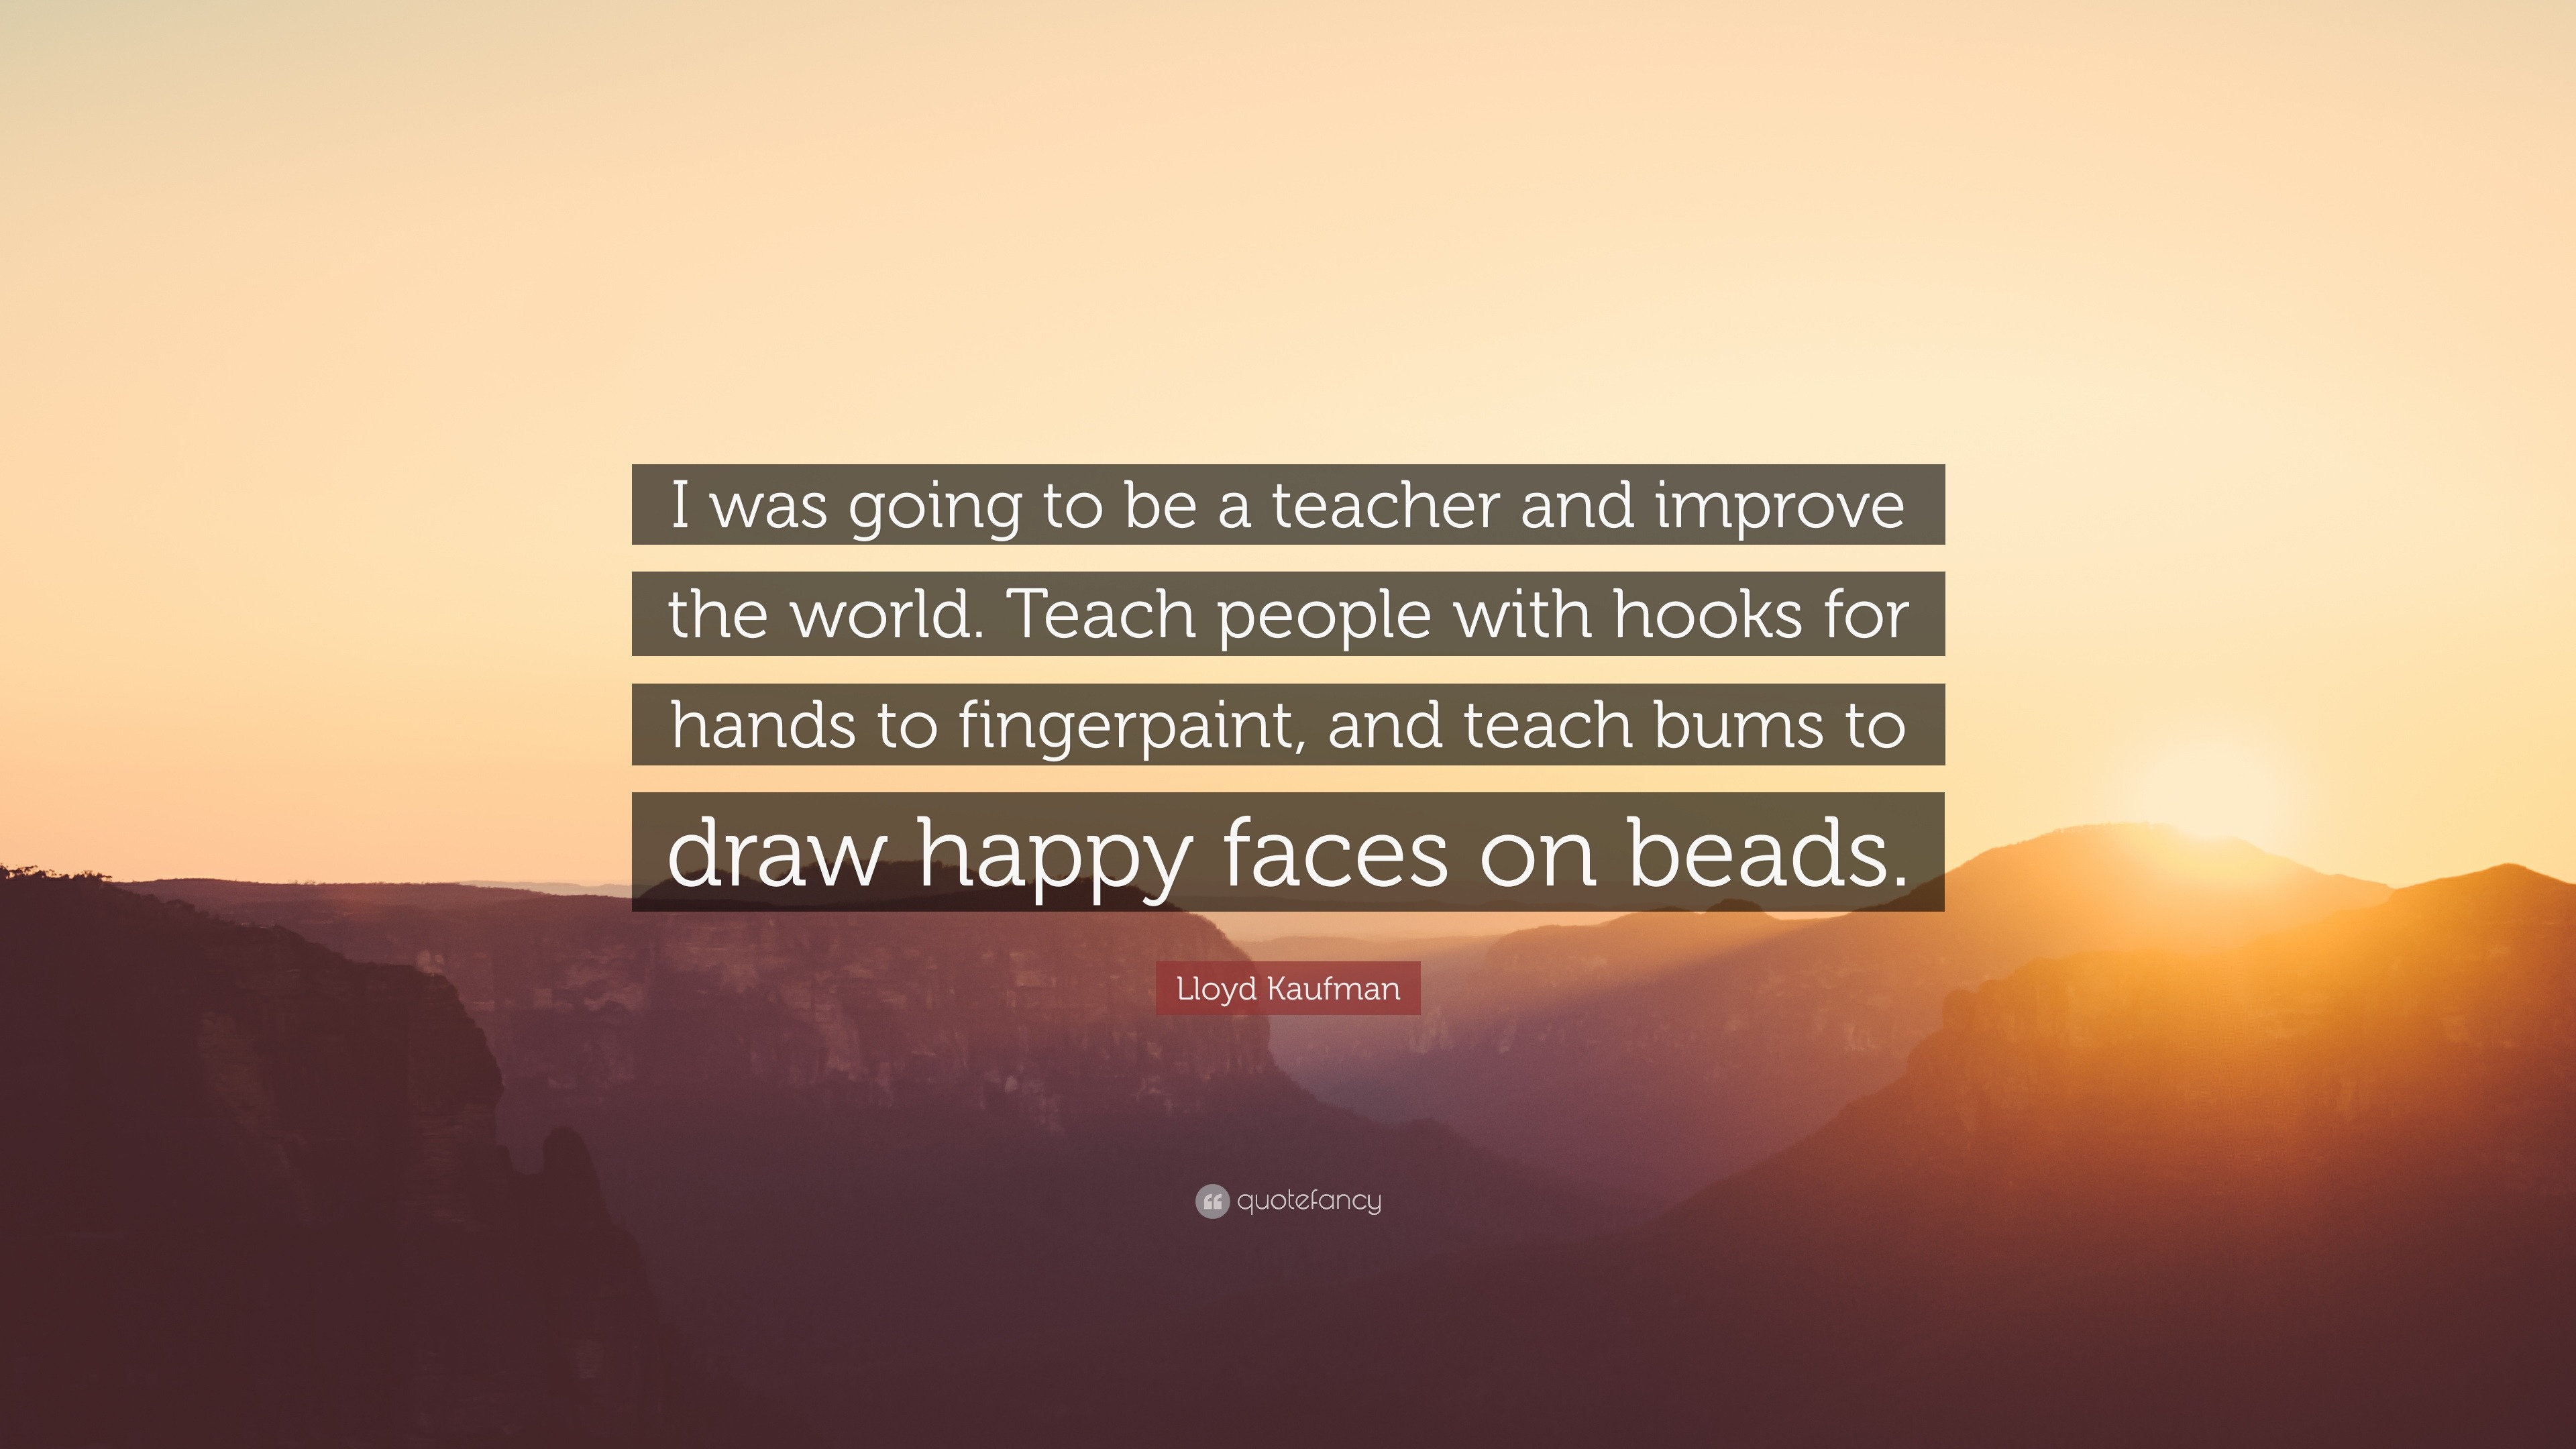 Lloyd Kaufman Quote: “I was going to be a teacher and improve the world.  Teach people with hooks for hands to fingerpaint, and teach bums to d...”